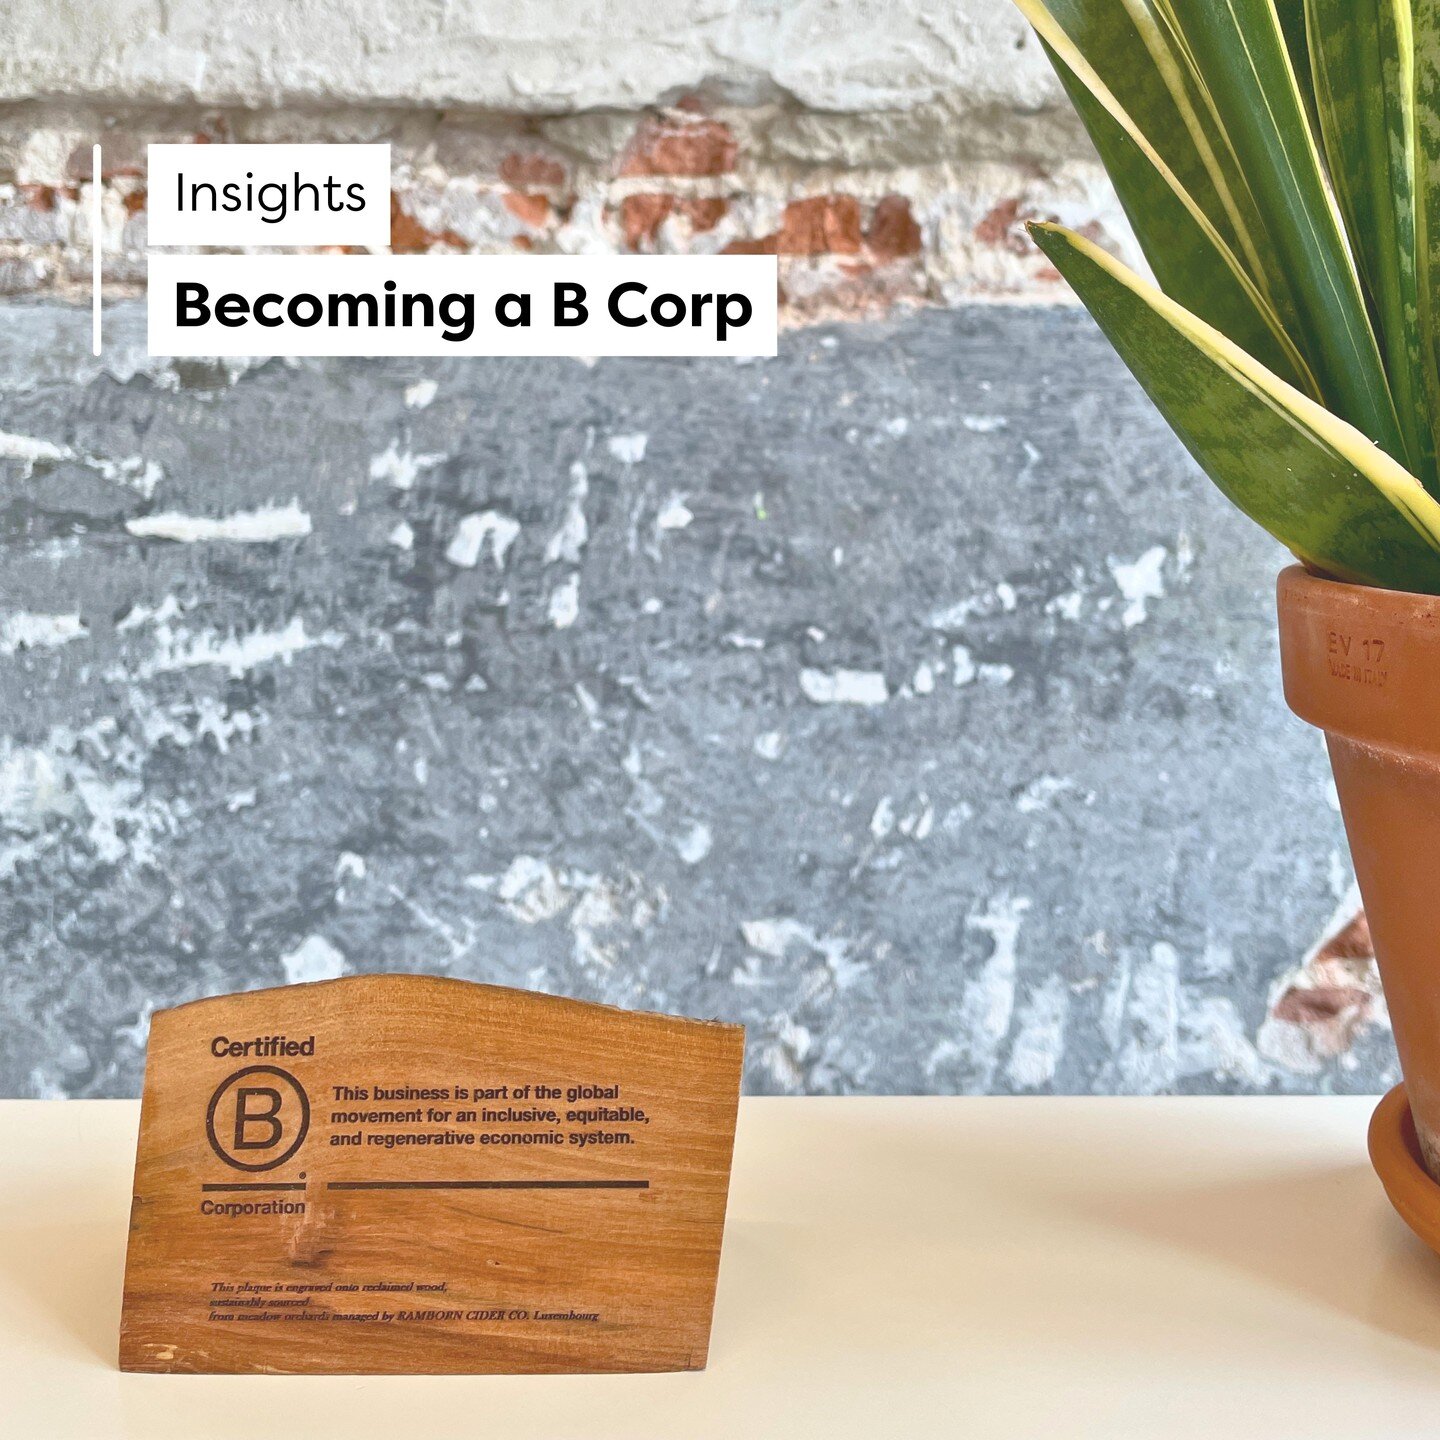 At FROLIC studio, we simply love March 🌸 Why? Well, it brings along spring, and, should this not be a good enough reason, it is also #BCorpMonth!

In 2022, we toasted to FROLIC studio receiving its B Corp certification and proudly joining the B Corp